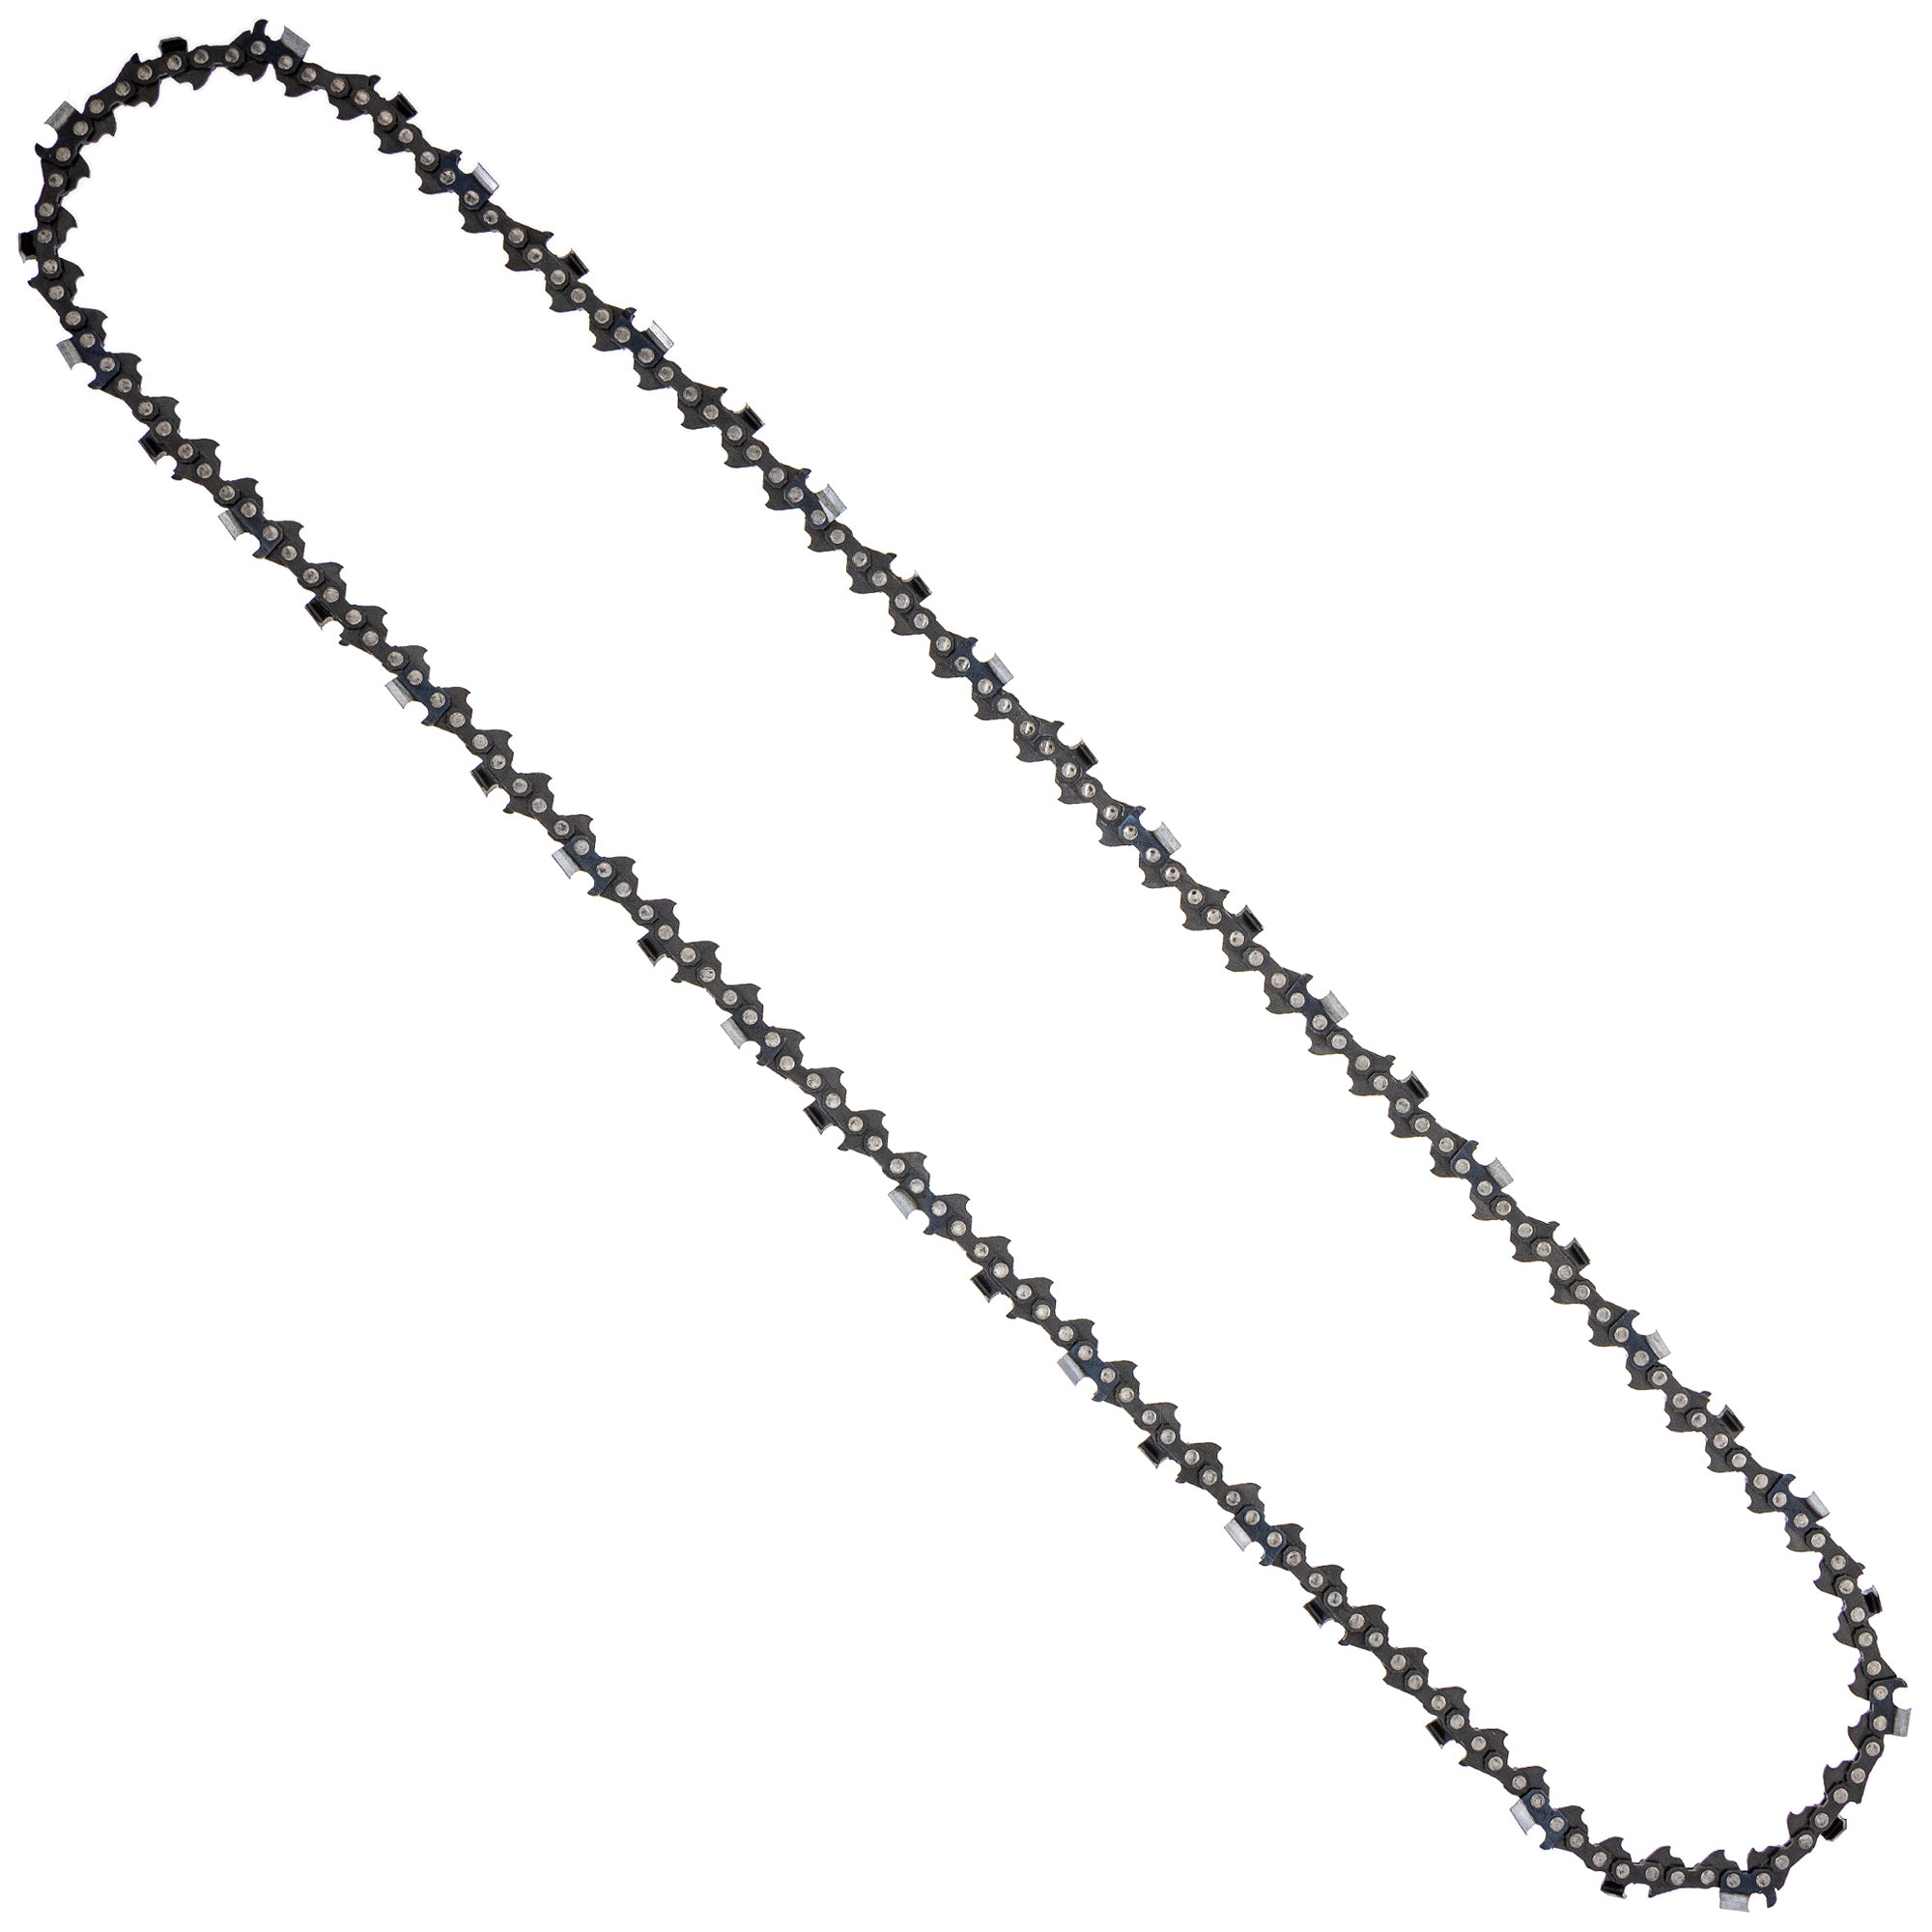 8TEN 810-CCC2280H Chain 3-Pack for zOTHER Oregon MS 066 064 056